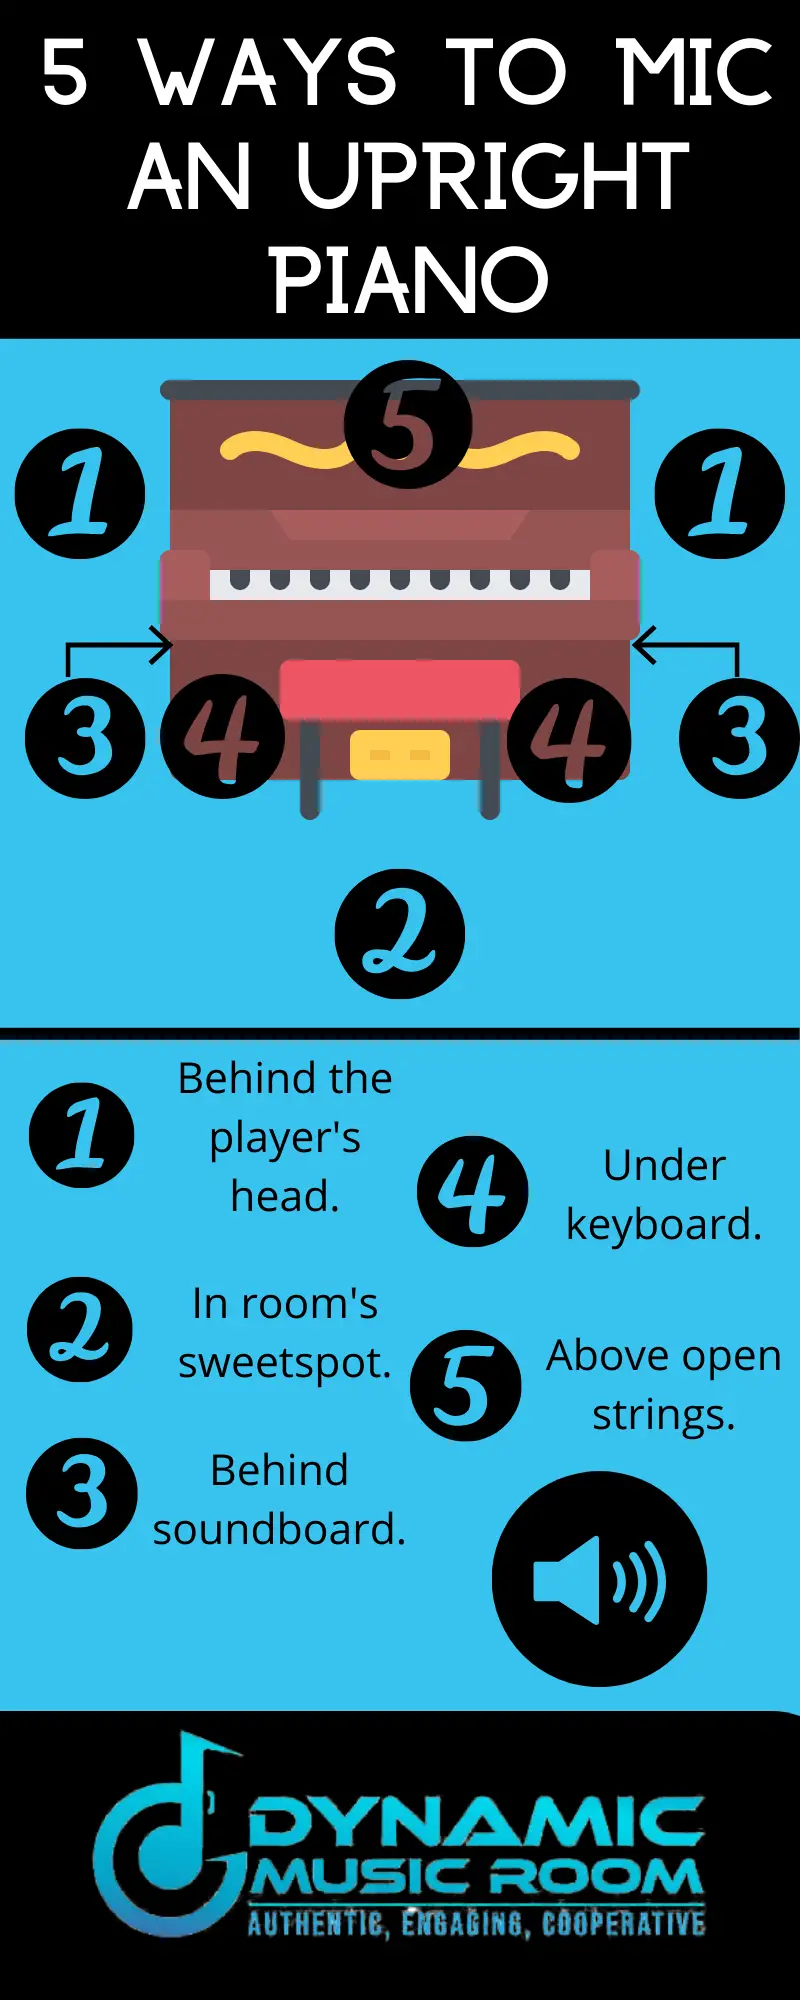 image 5 ways to mic an upright piano